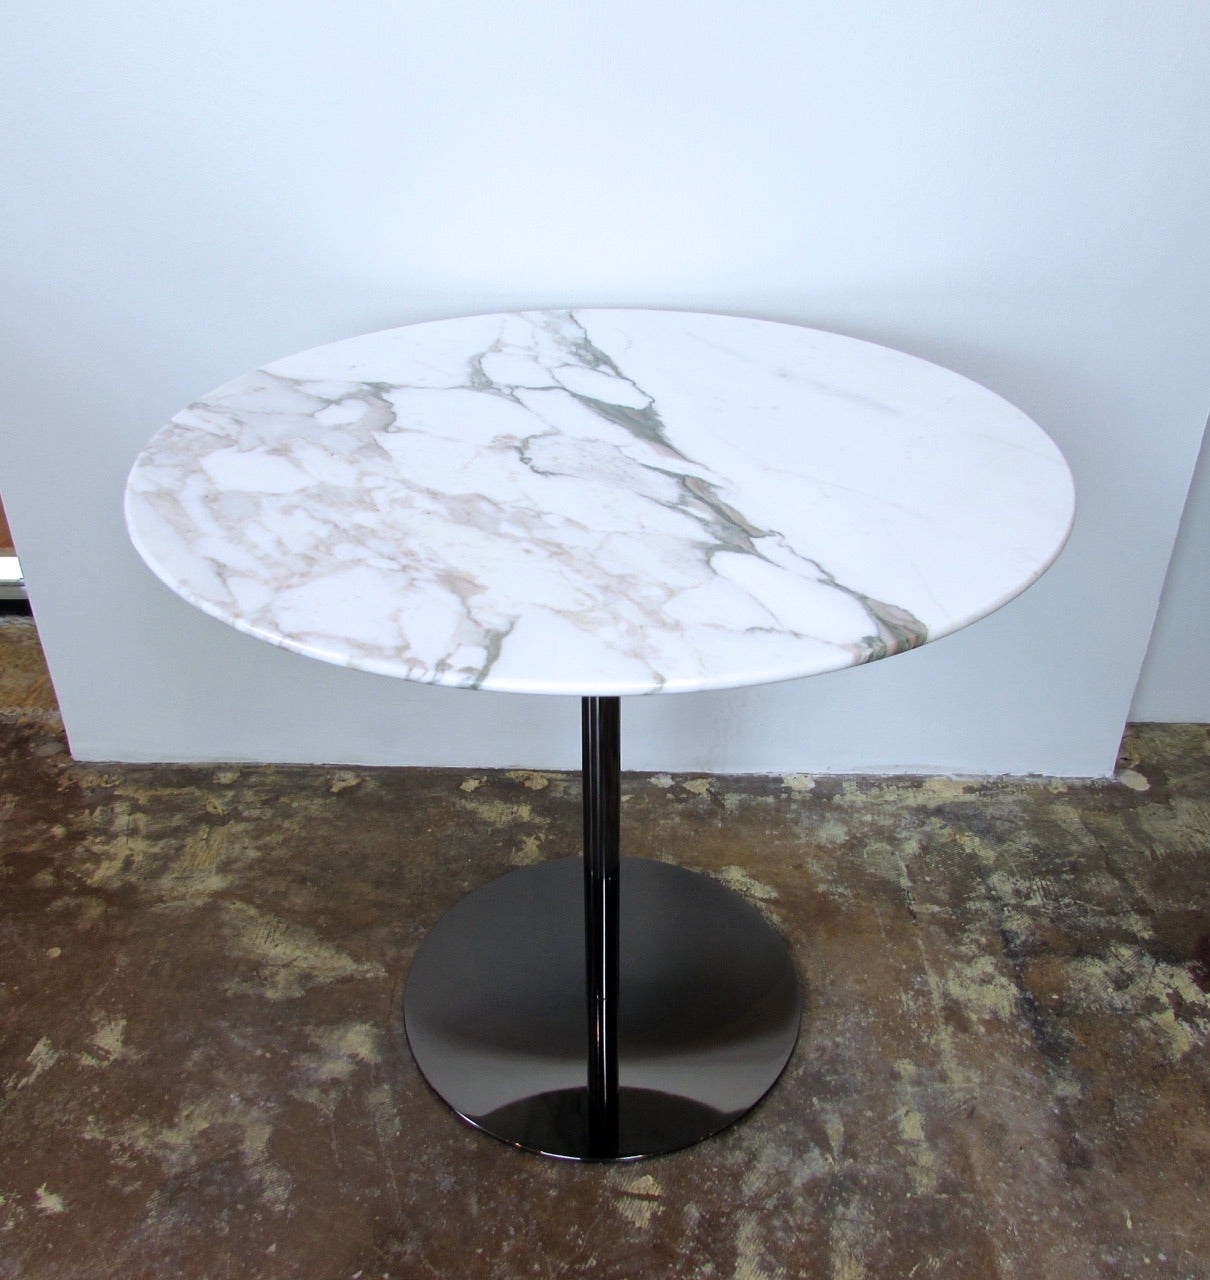 Calacatta marble and bright black-nickel Bellagio side table by Gordon Guillaumier for Minotti.